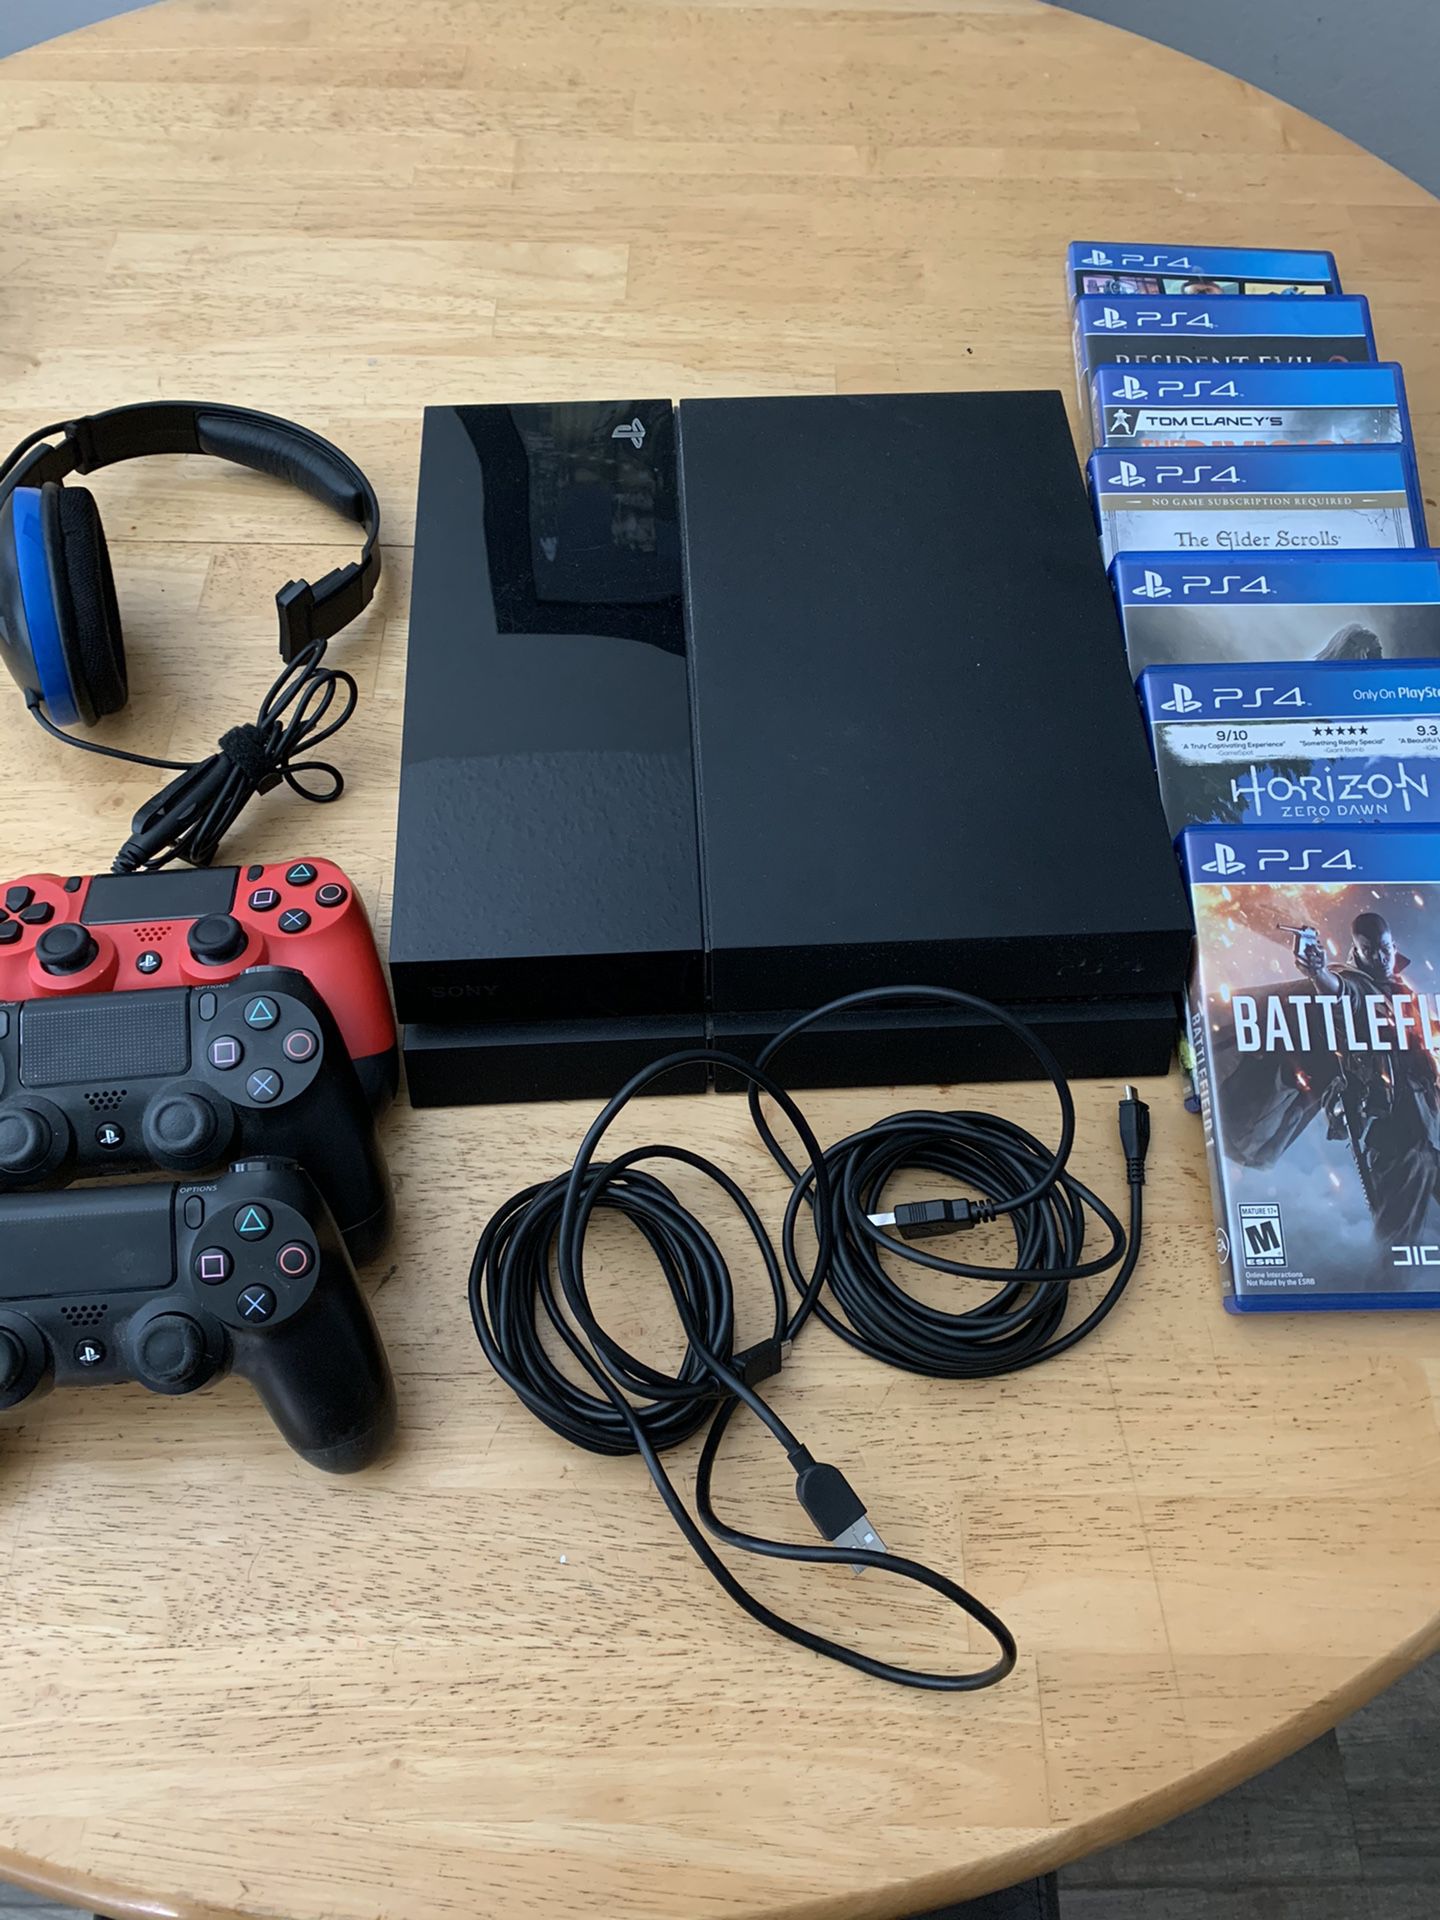 PS4 w/ games, headset, and controllers